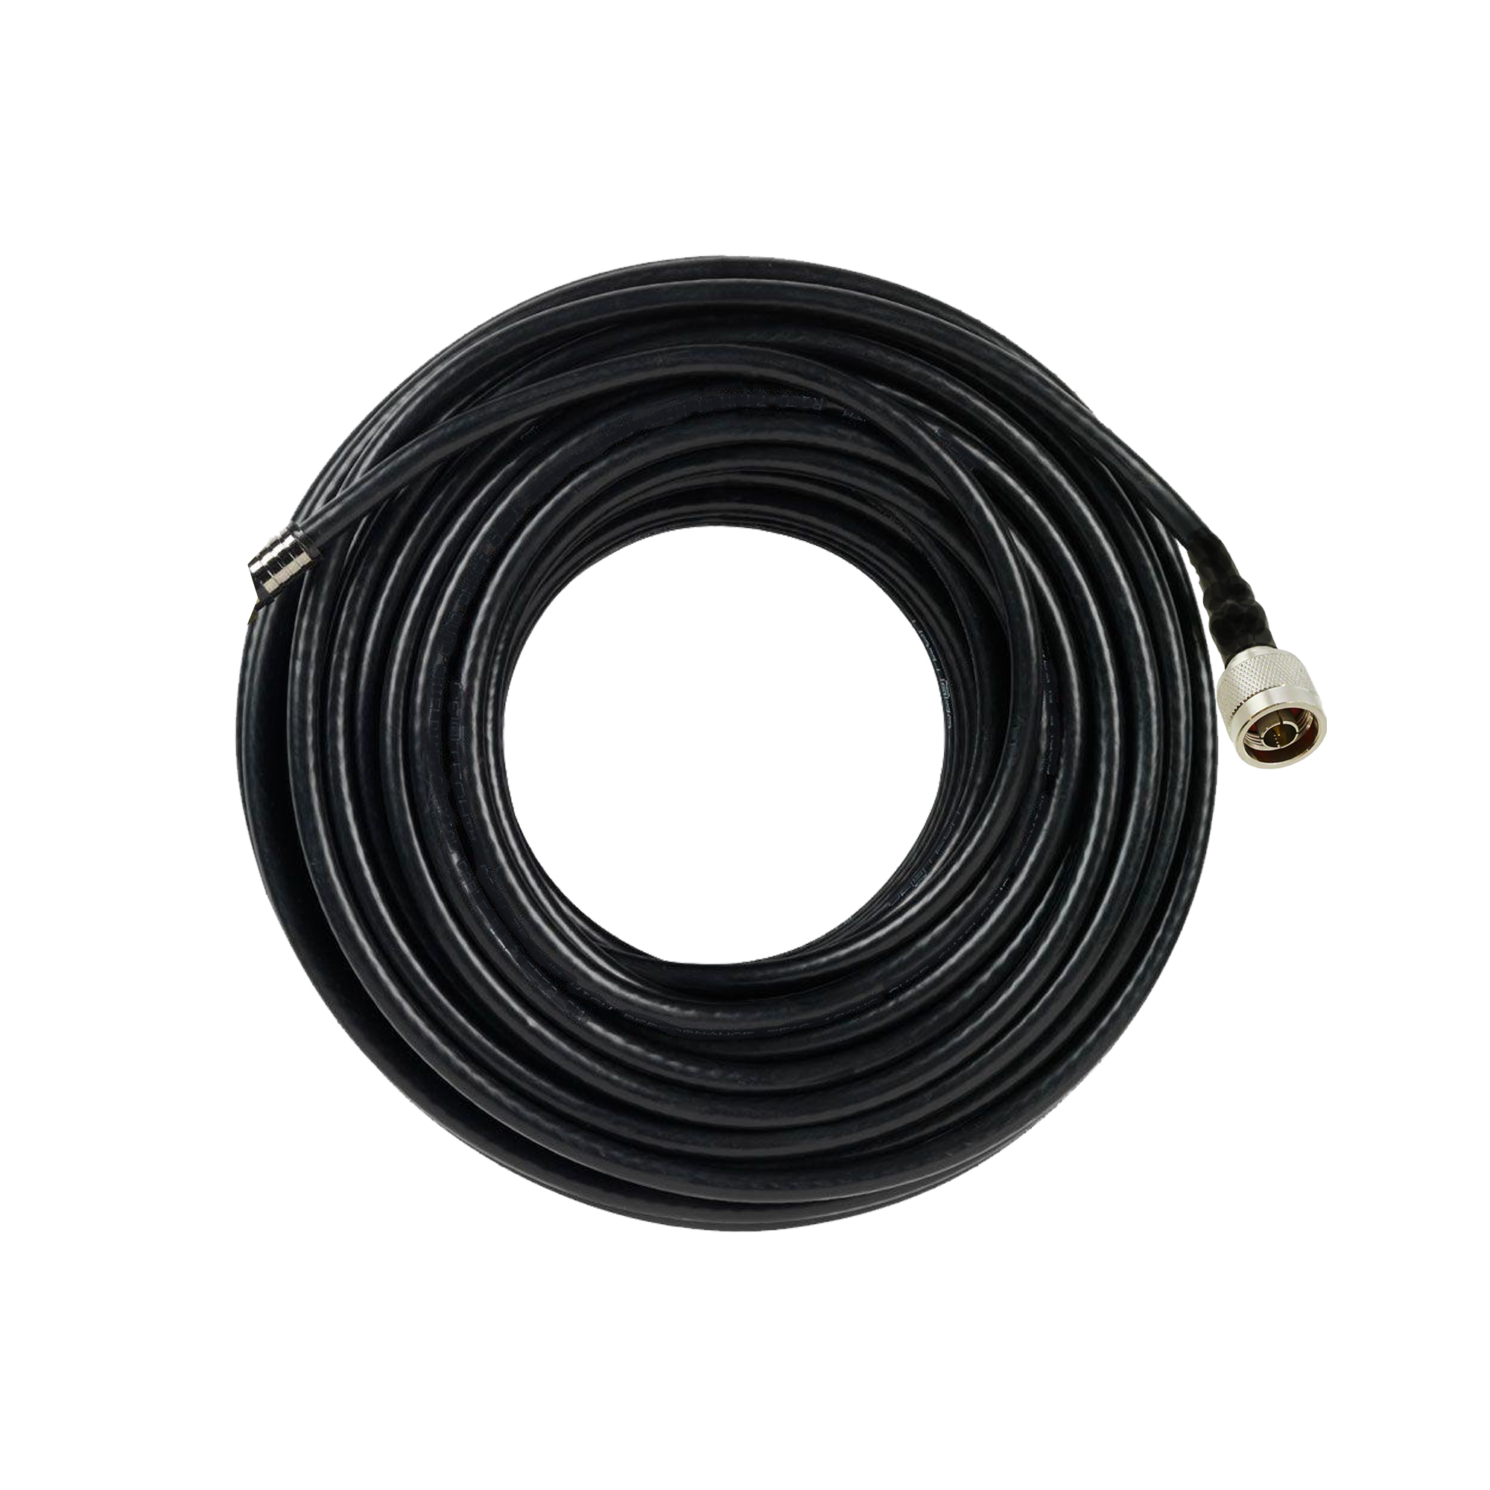 Microhard 5 ft cable